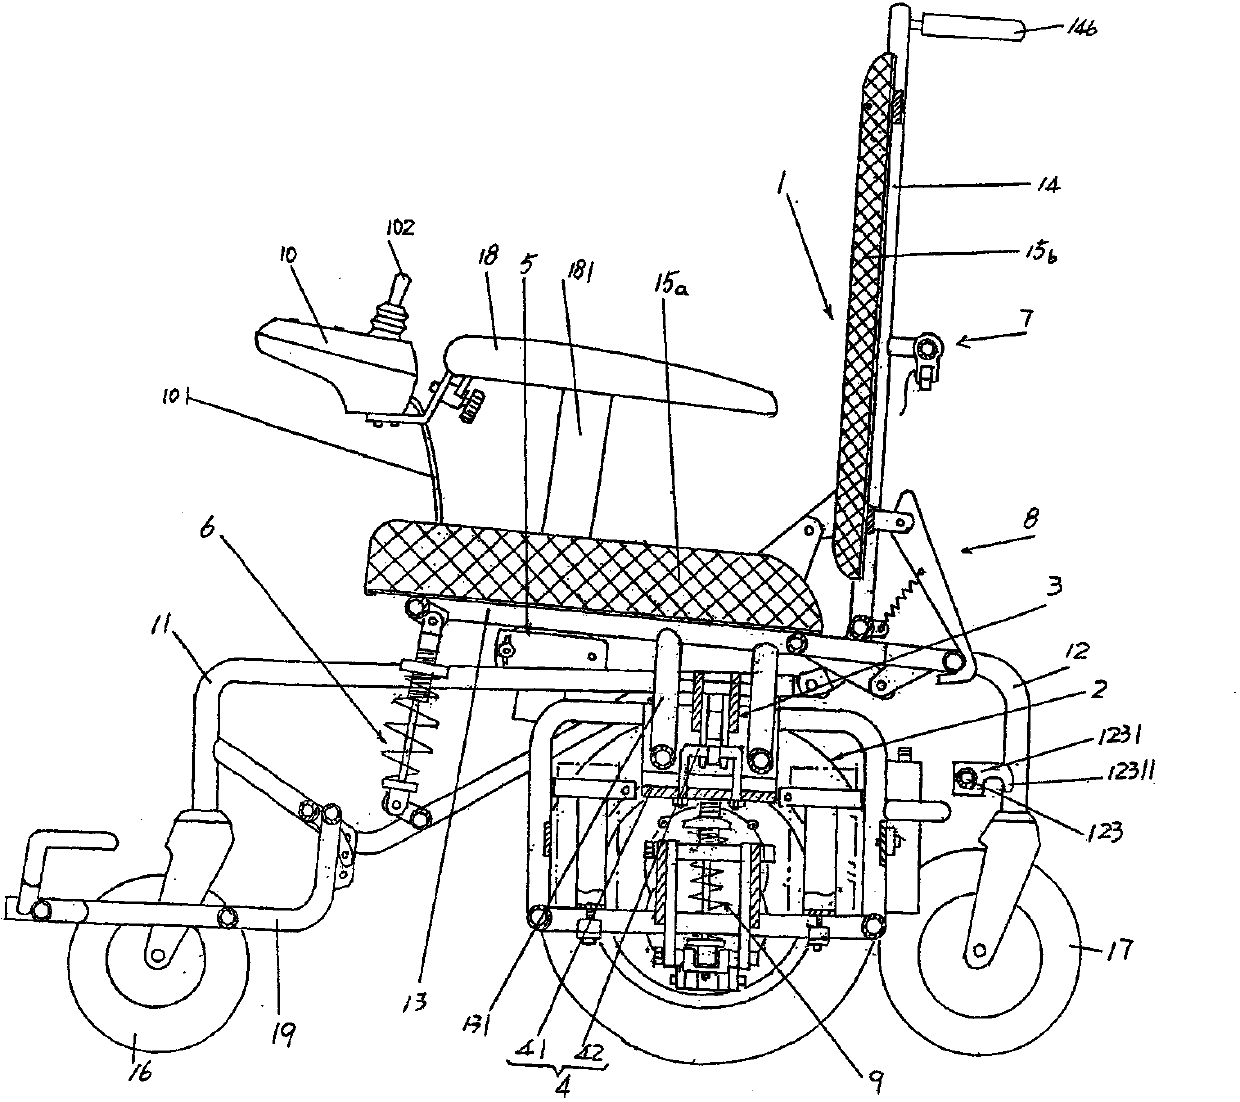 Electric wheelchair with connectable or separable body and electric mechanism